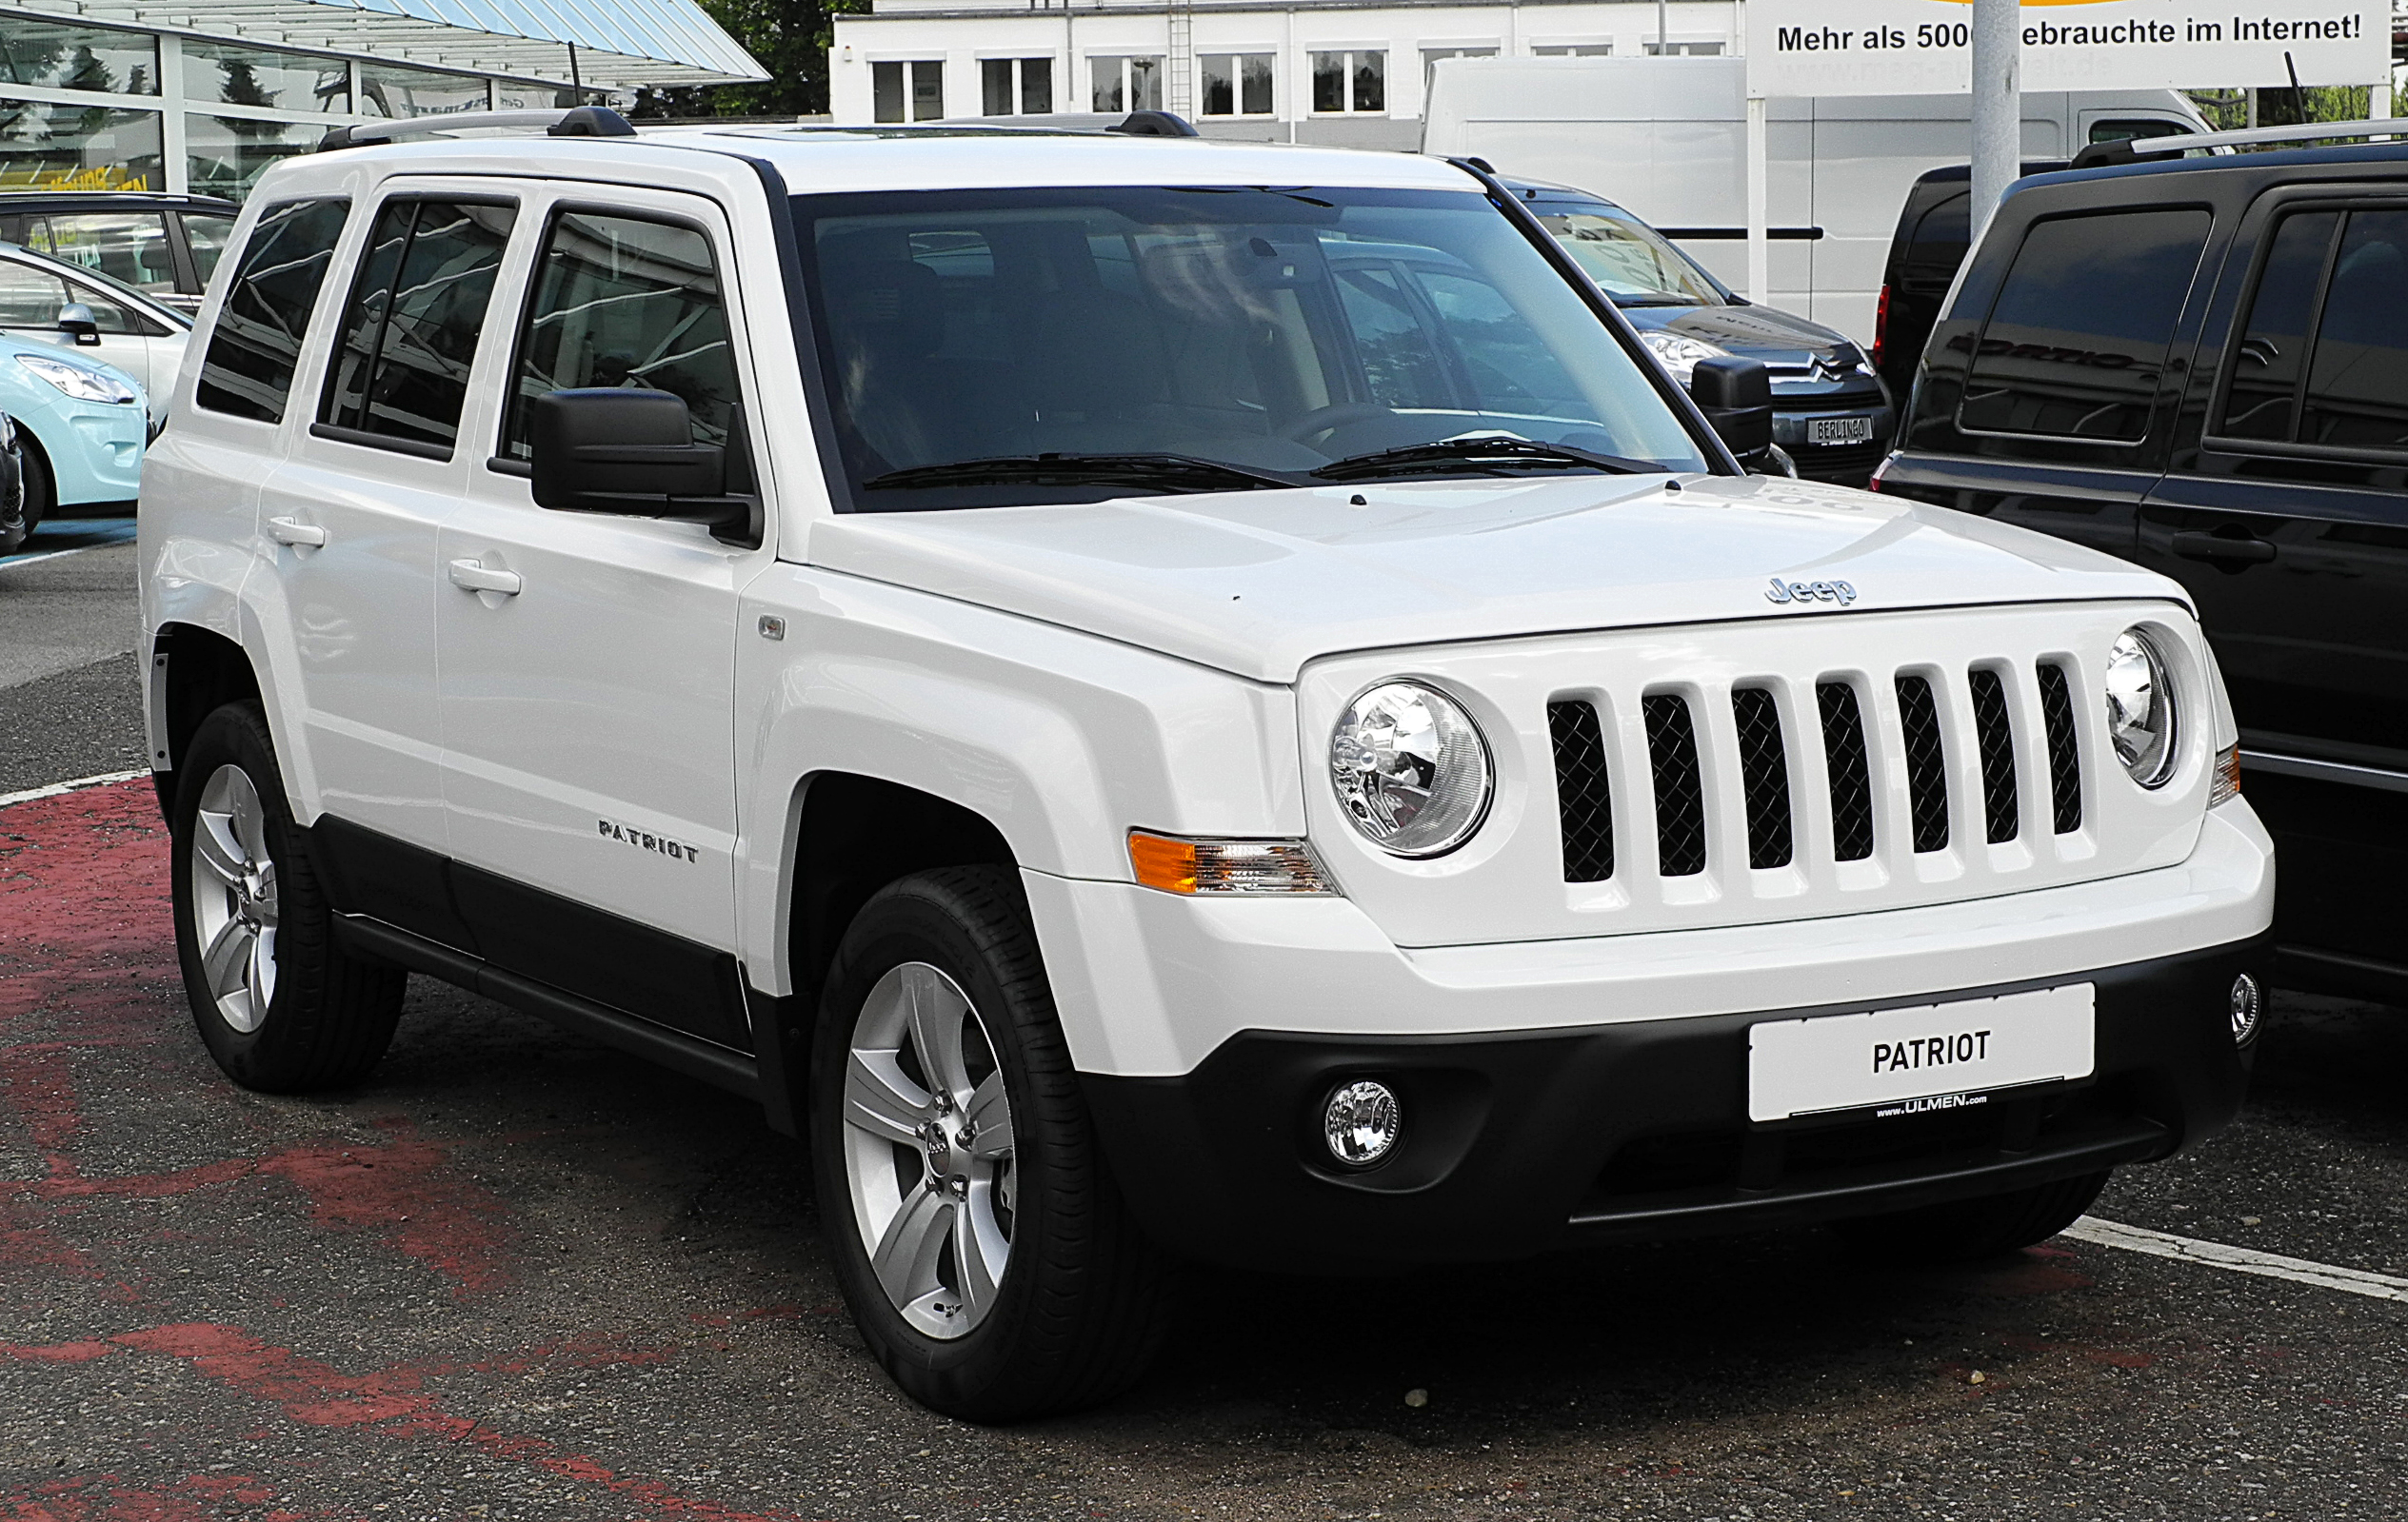 Jeep Patriot 2.2 CRD technical details, history, photos on